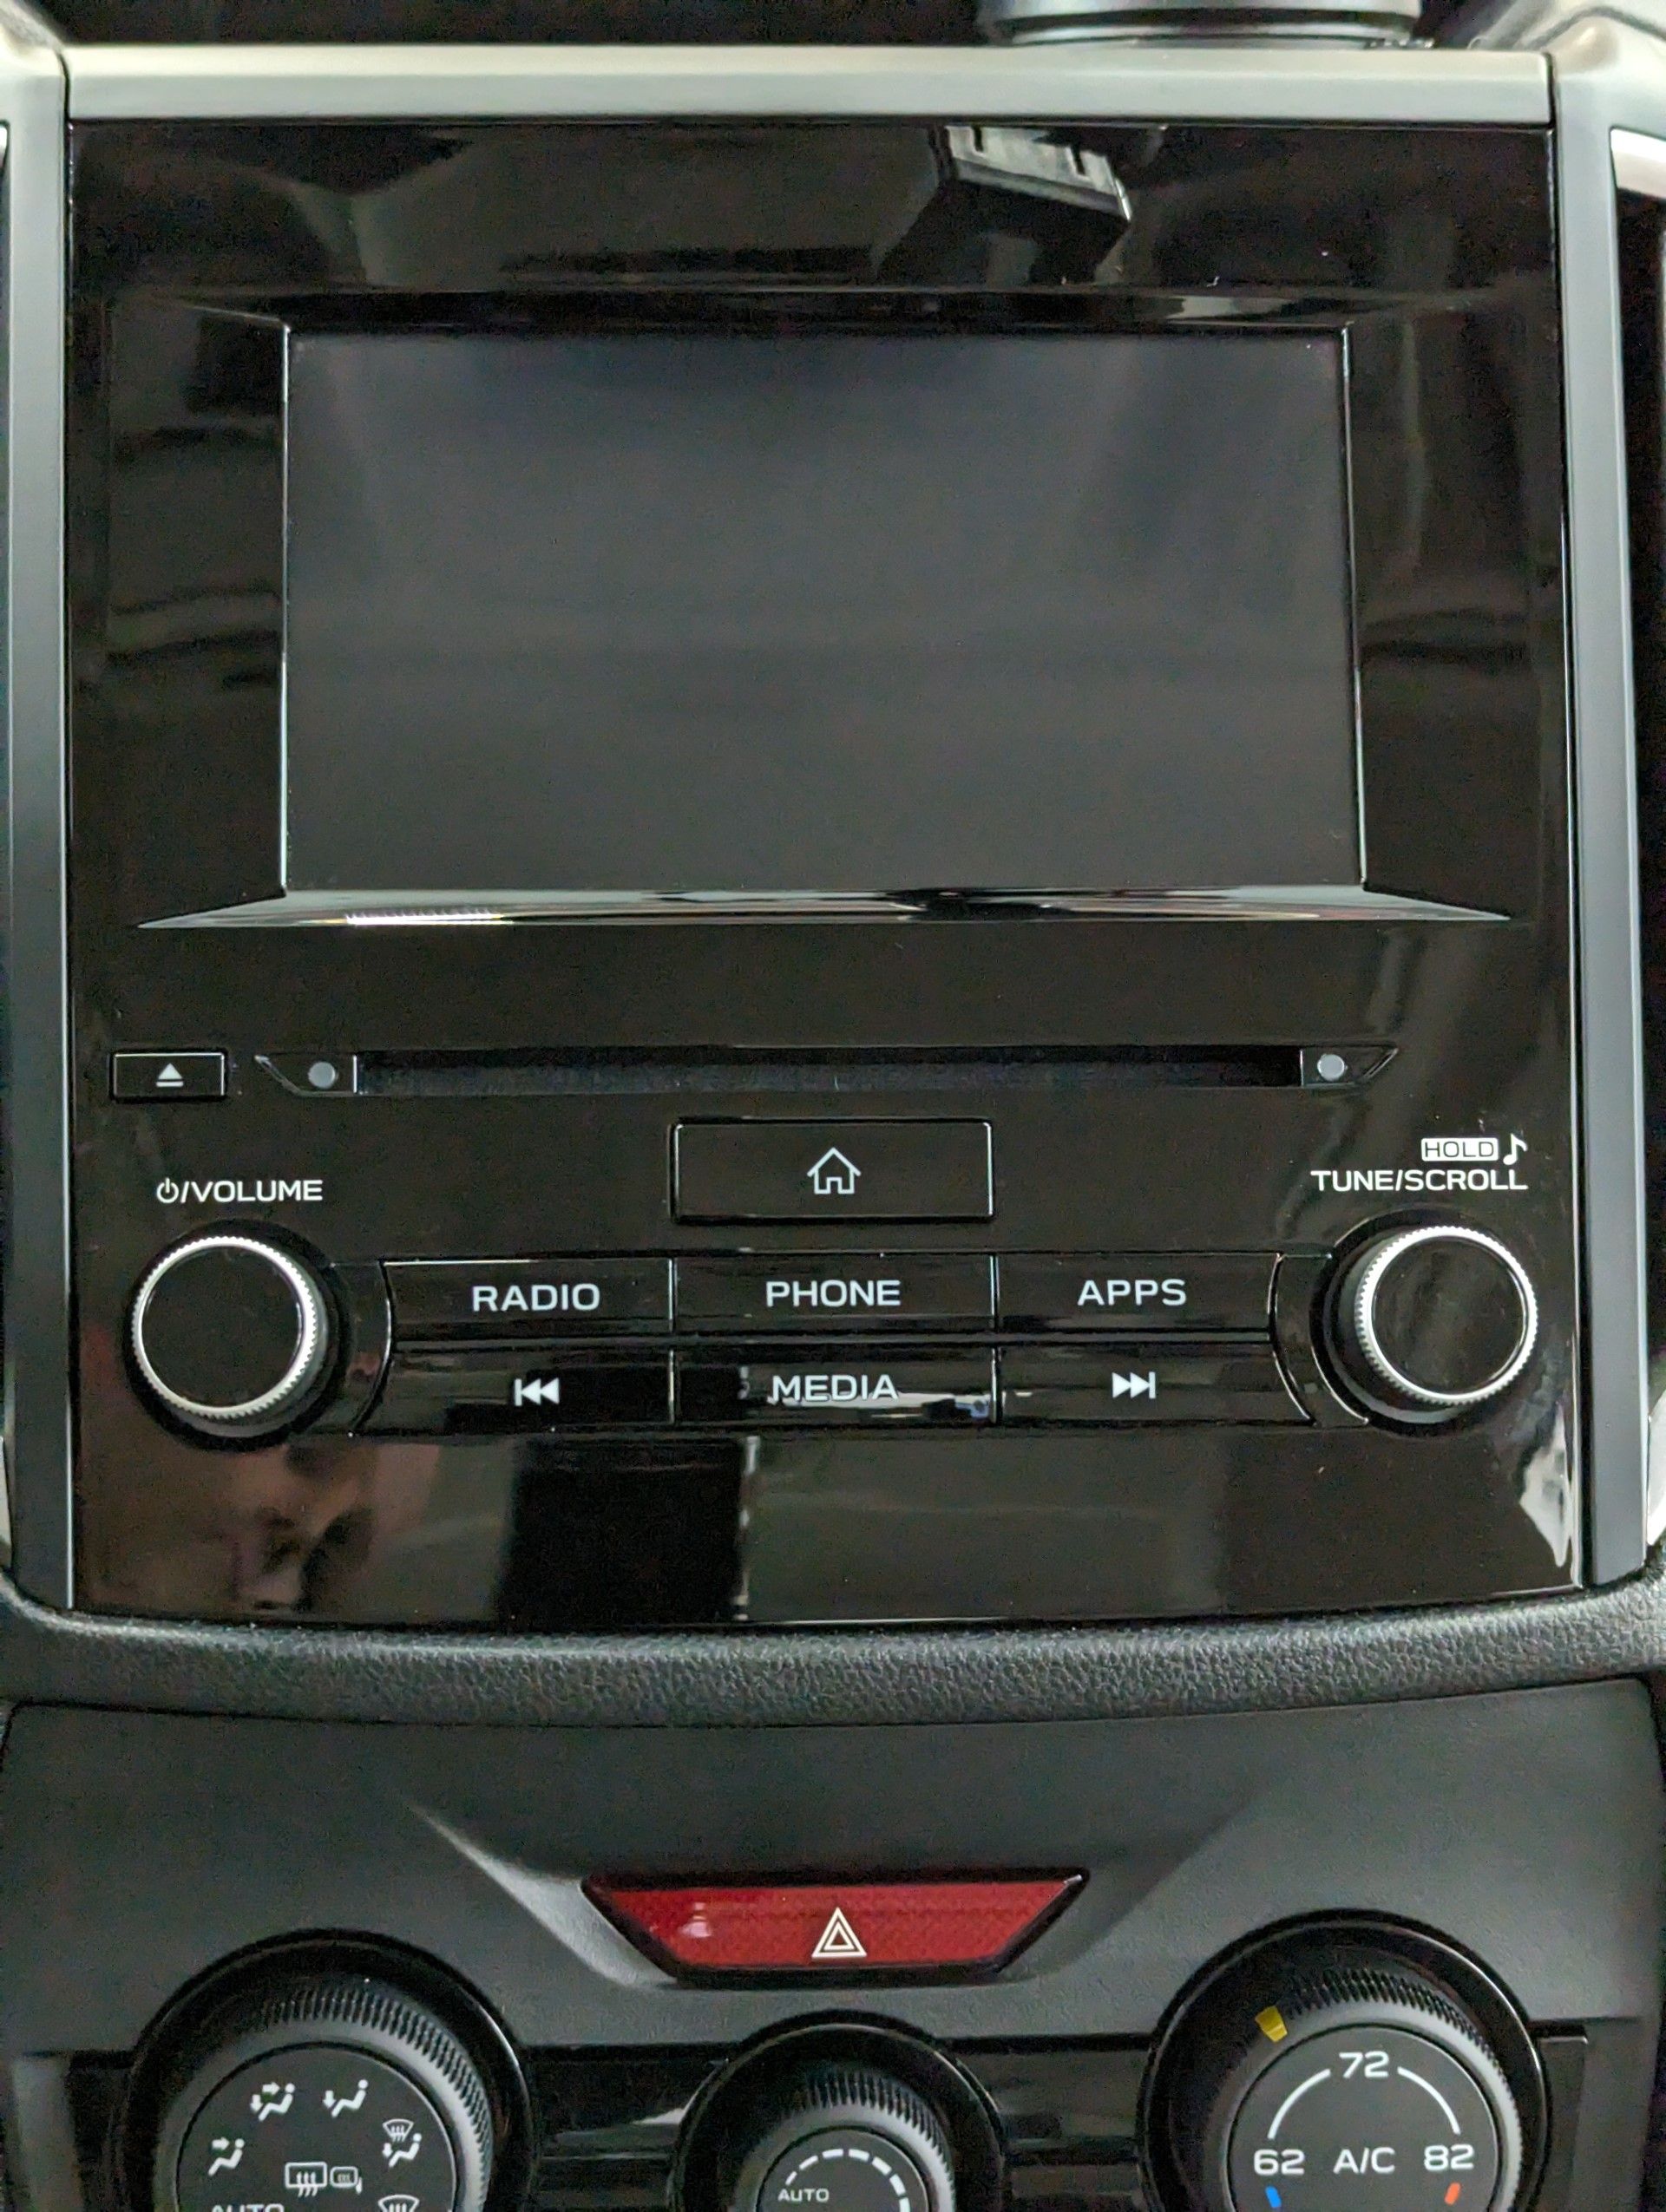 After Interior Detailing - A clean car radio with buttons for radio and phone